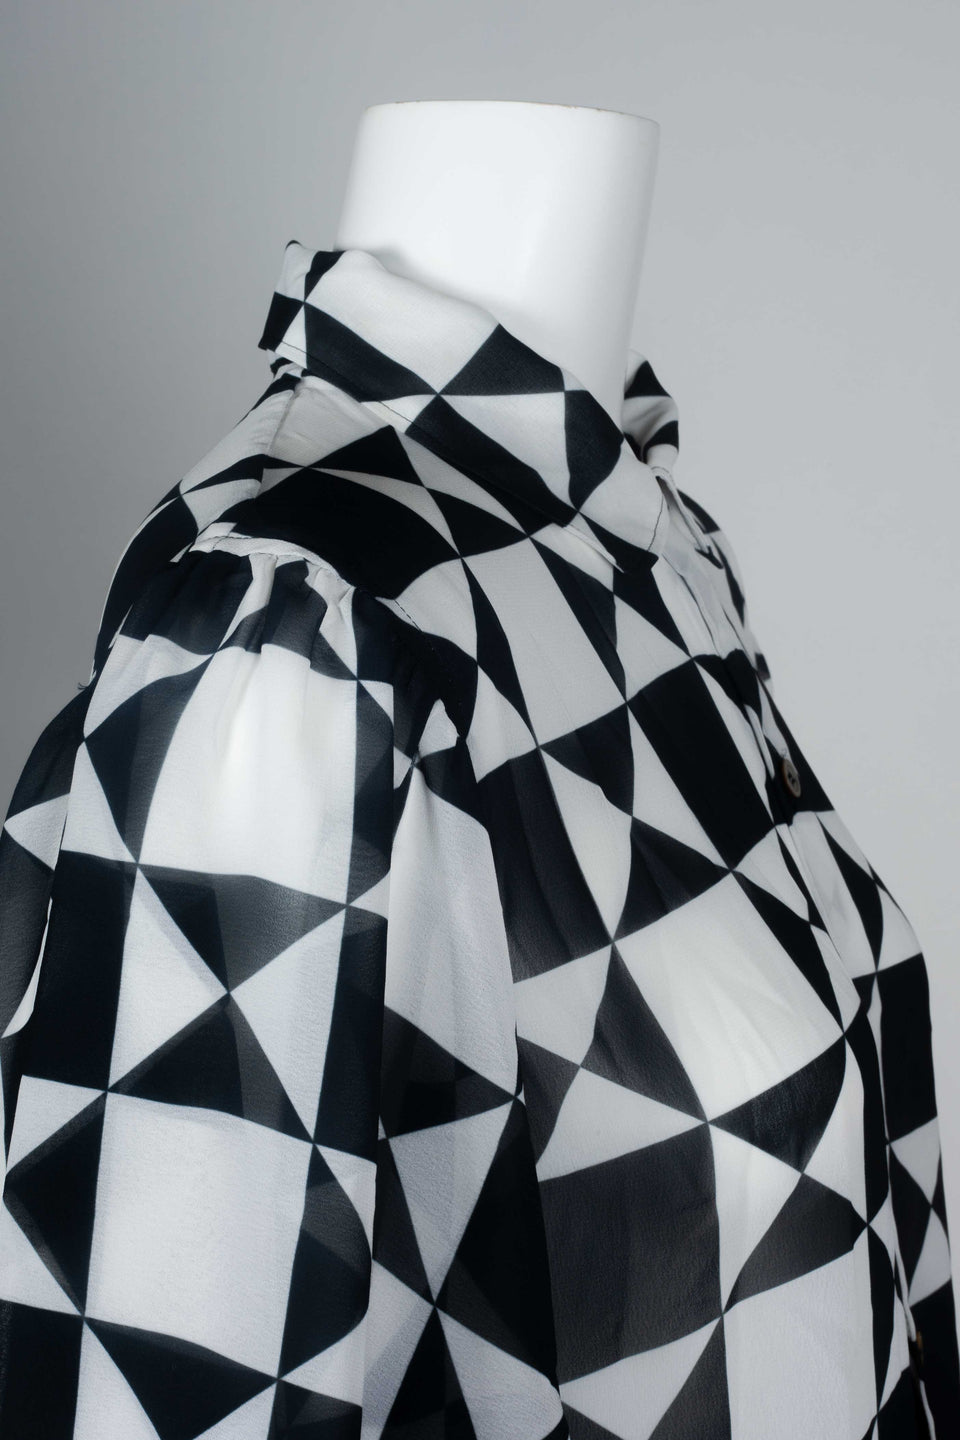 Comme des Garçons 1989 chiffon blouse from Japan with black and white geometric motif, short lantern sleeves and cut away collar.